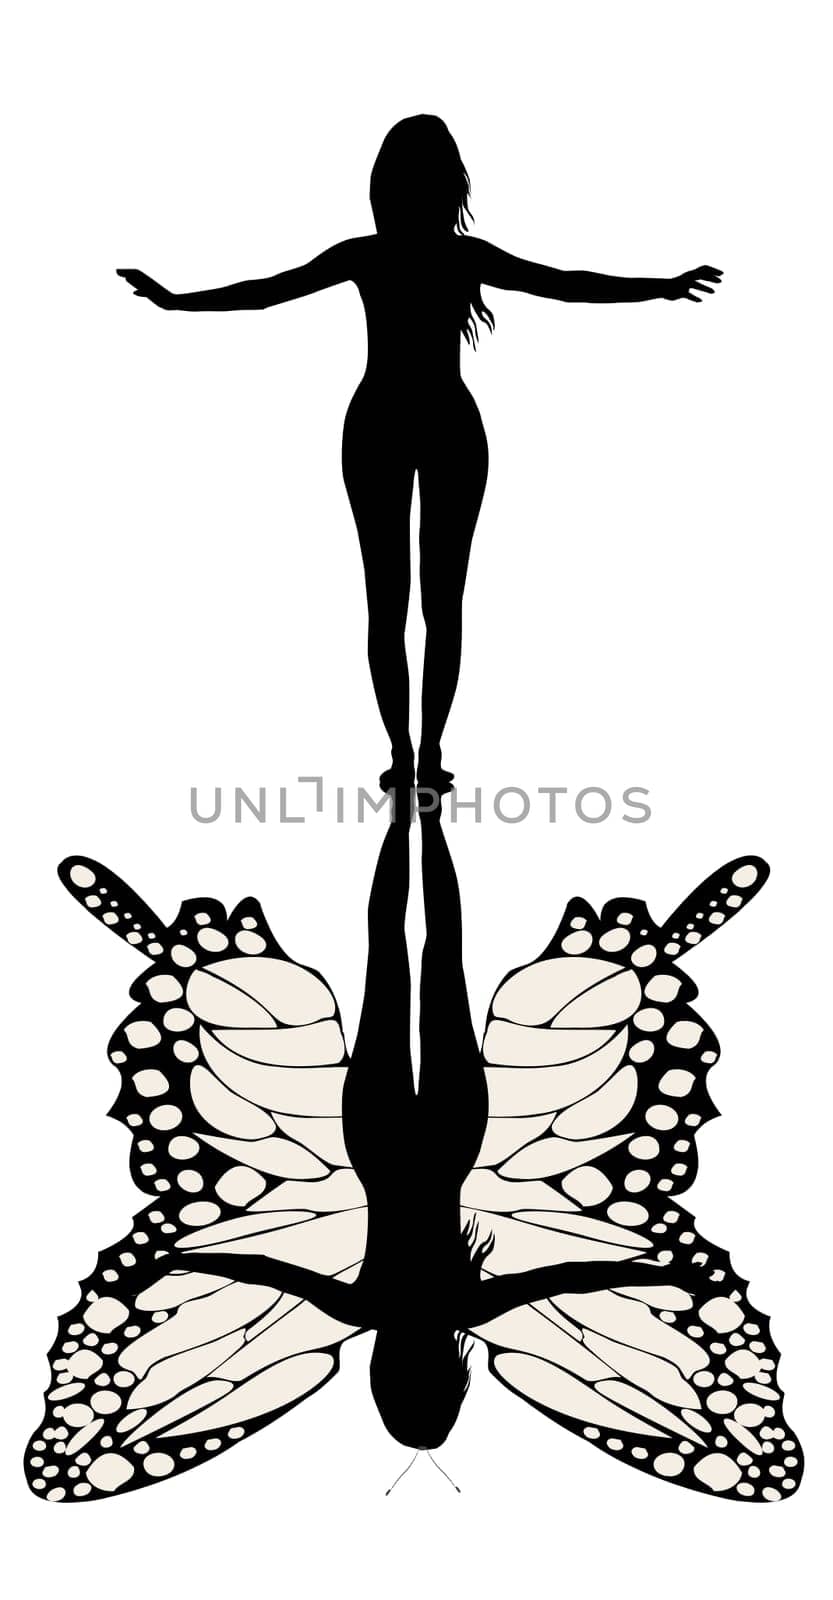 Woman silhouette with realistic butterfly shadow